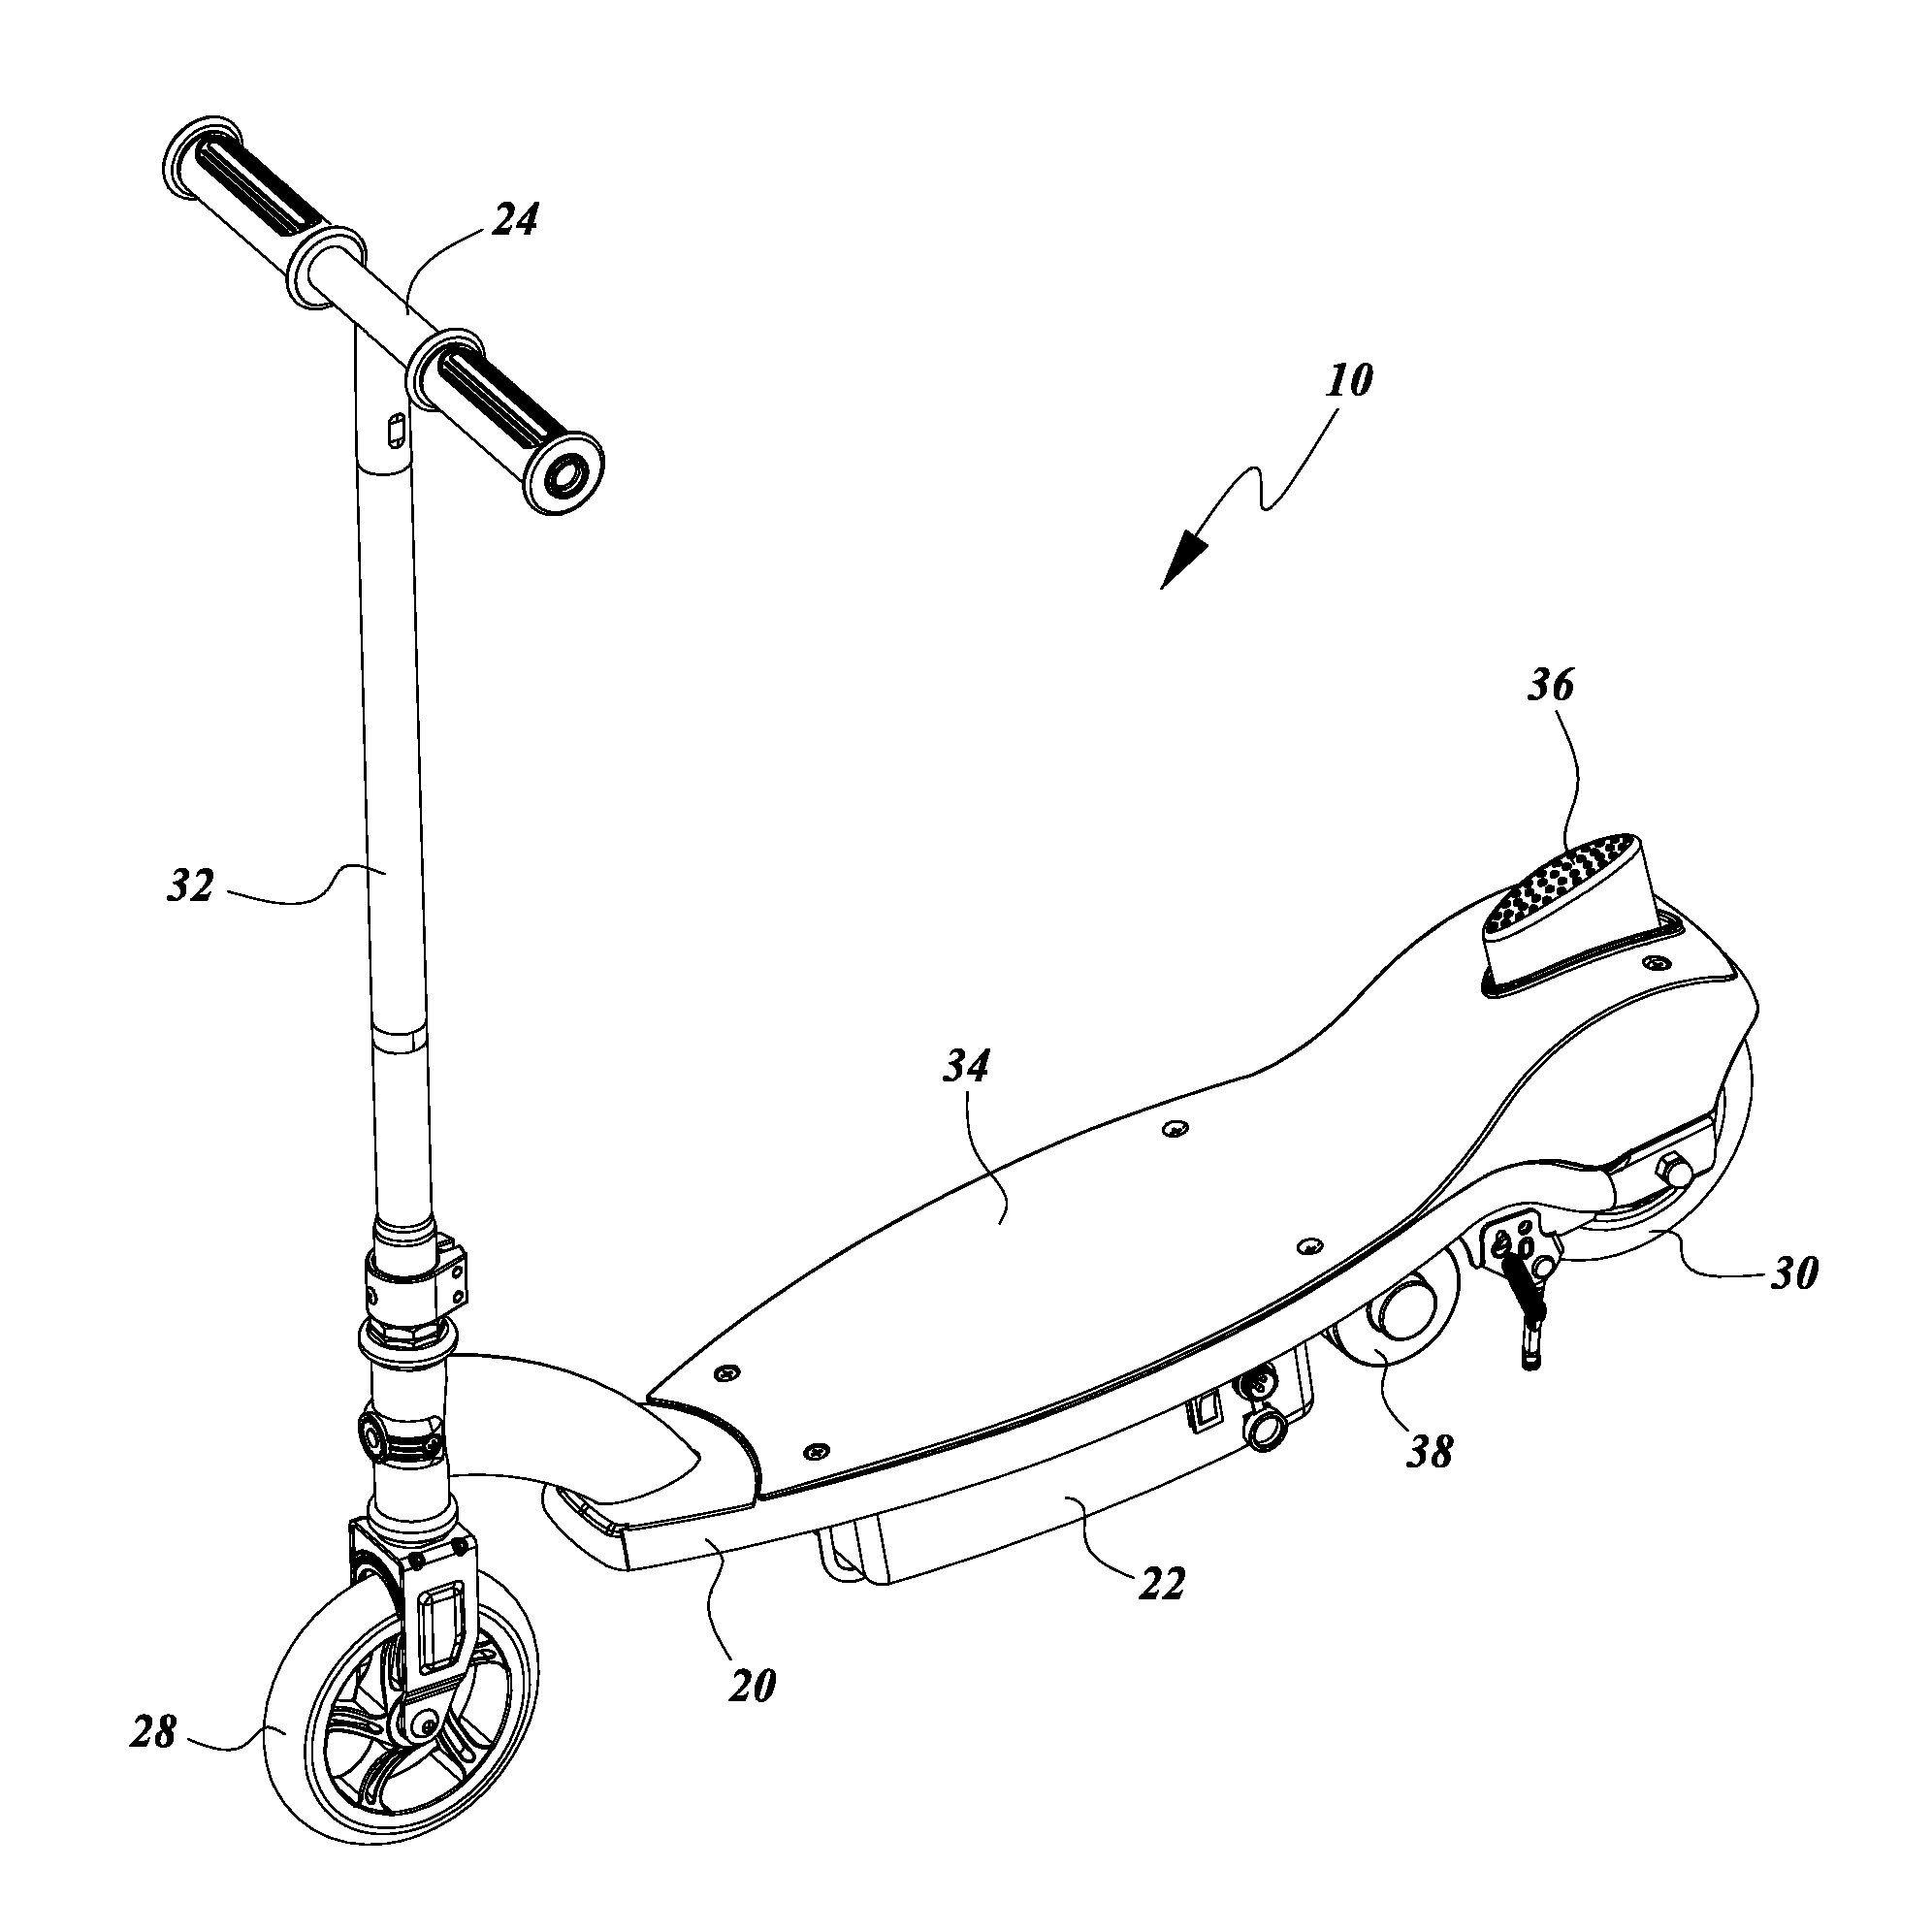 Braking device for a personal mobility vehicle